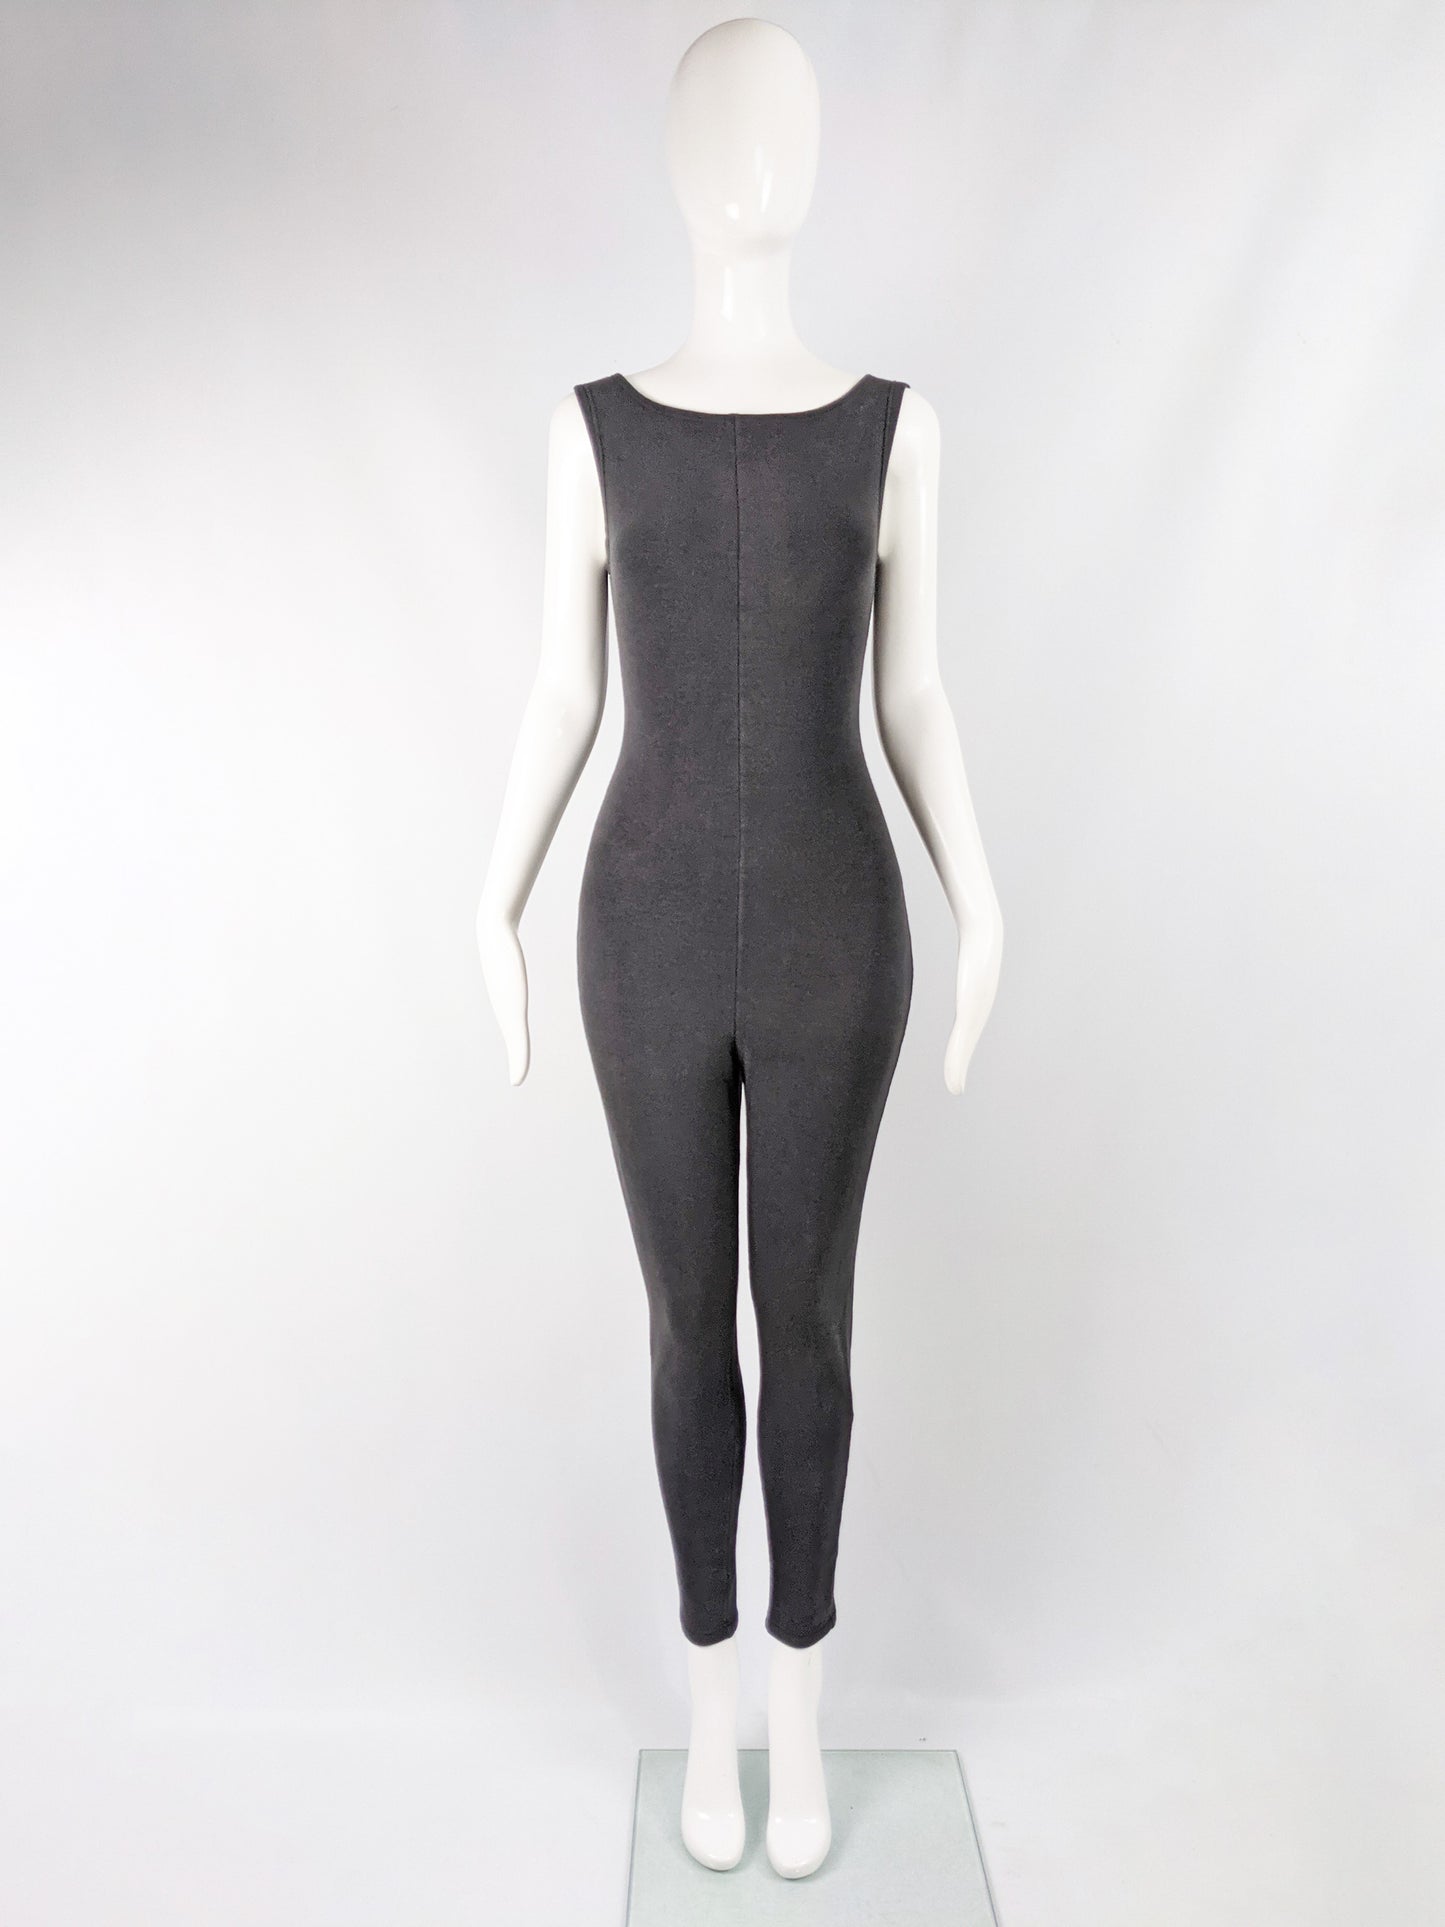 Womens Vintage Bodycon Jersey Sleeveless Catsuit, 1980s